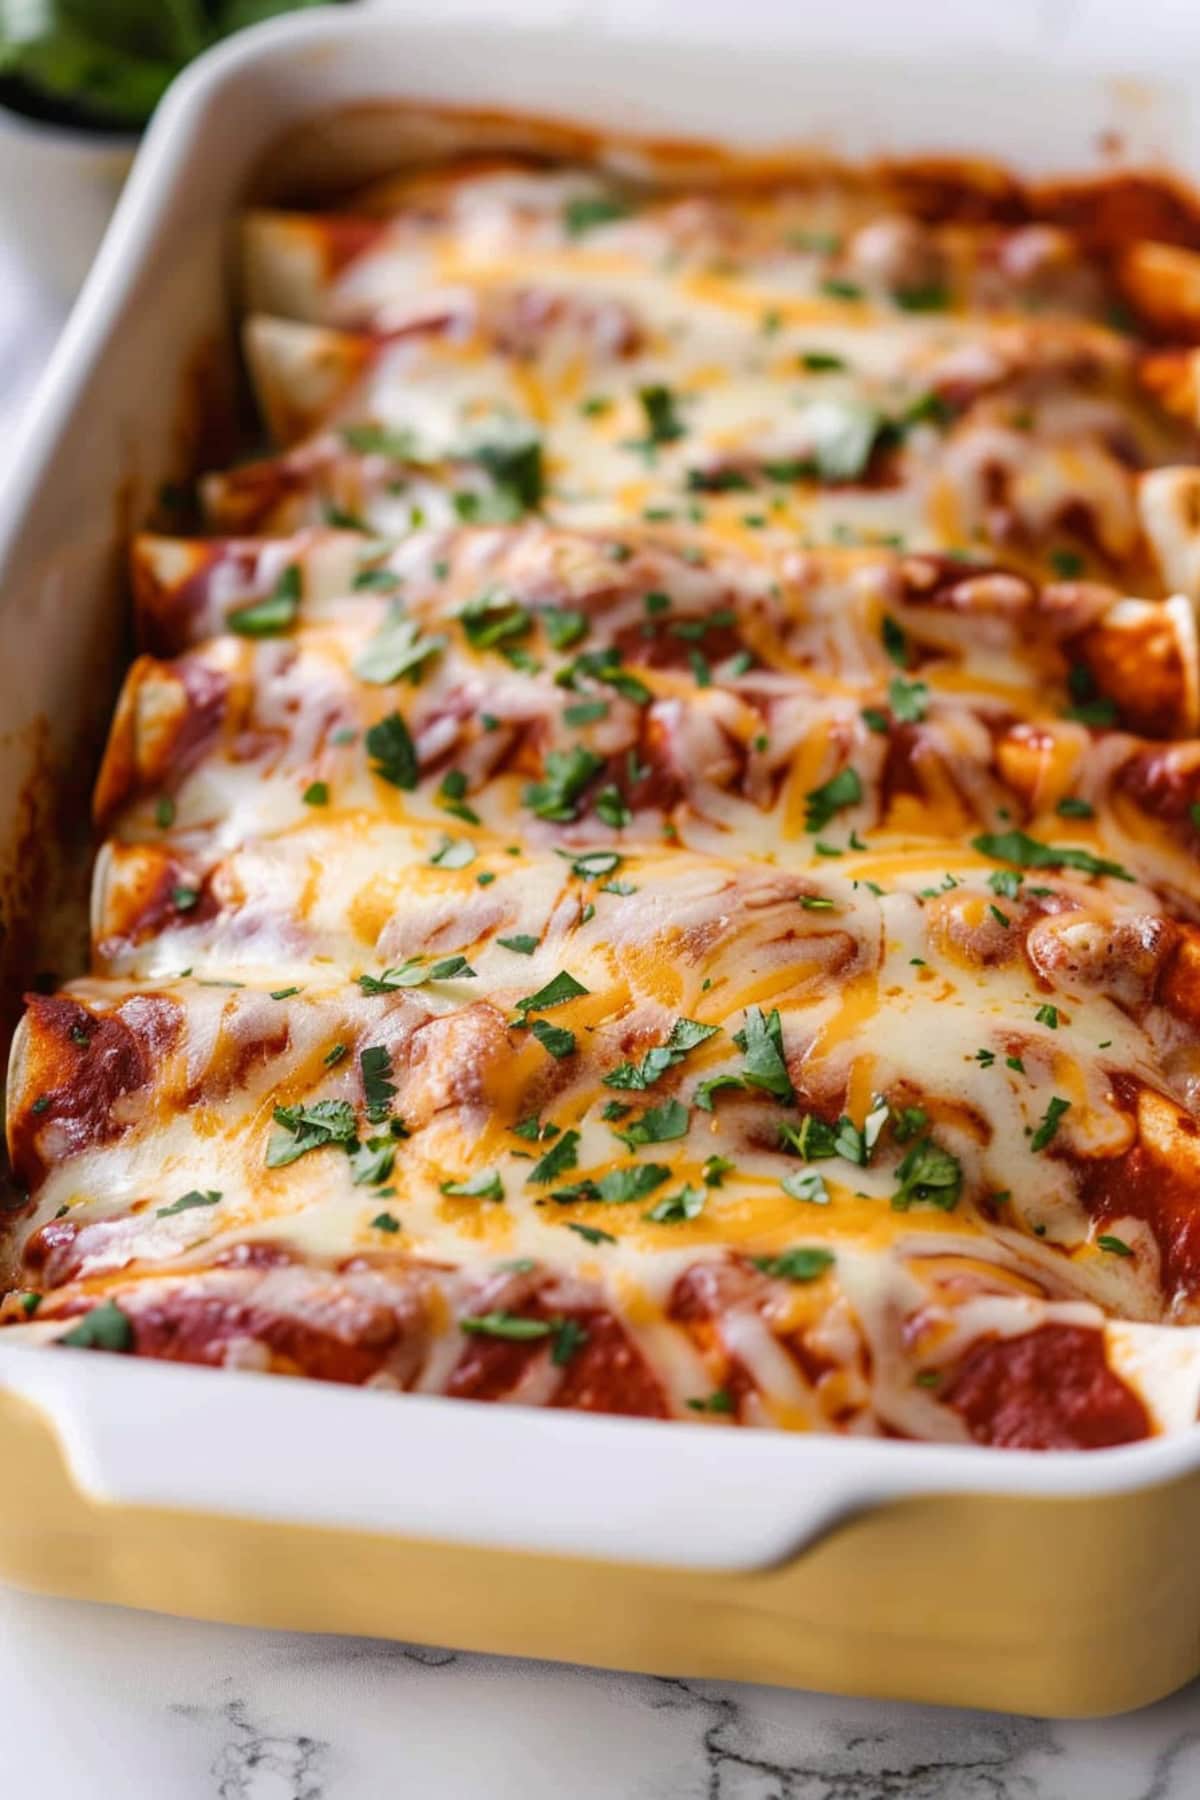 Pulled pork enchiladas on a yellow baking dish topped with melted cheese and enchilada sauce.